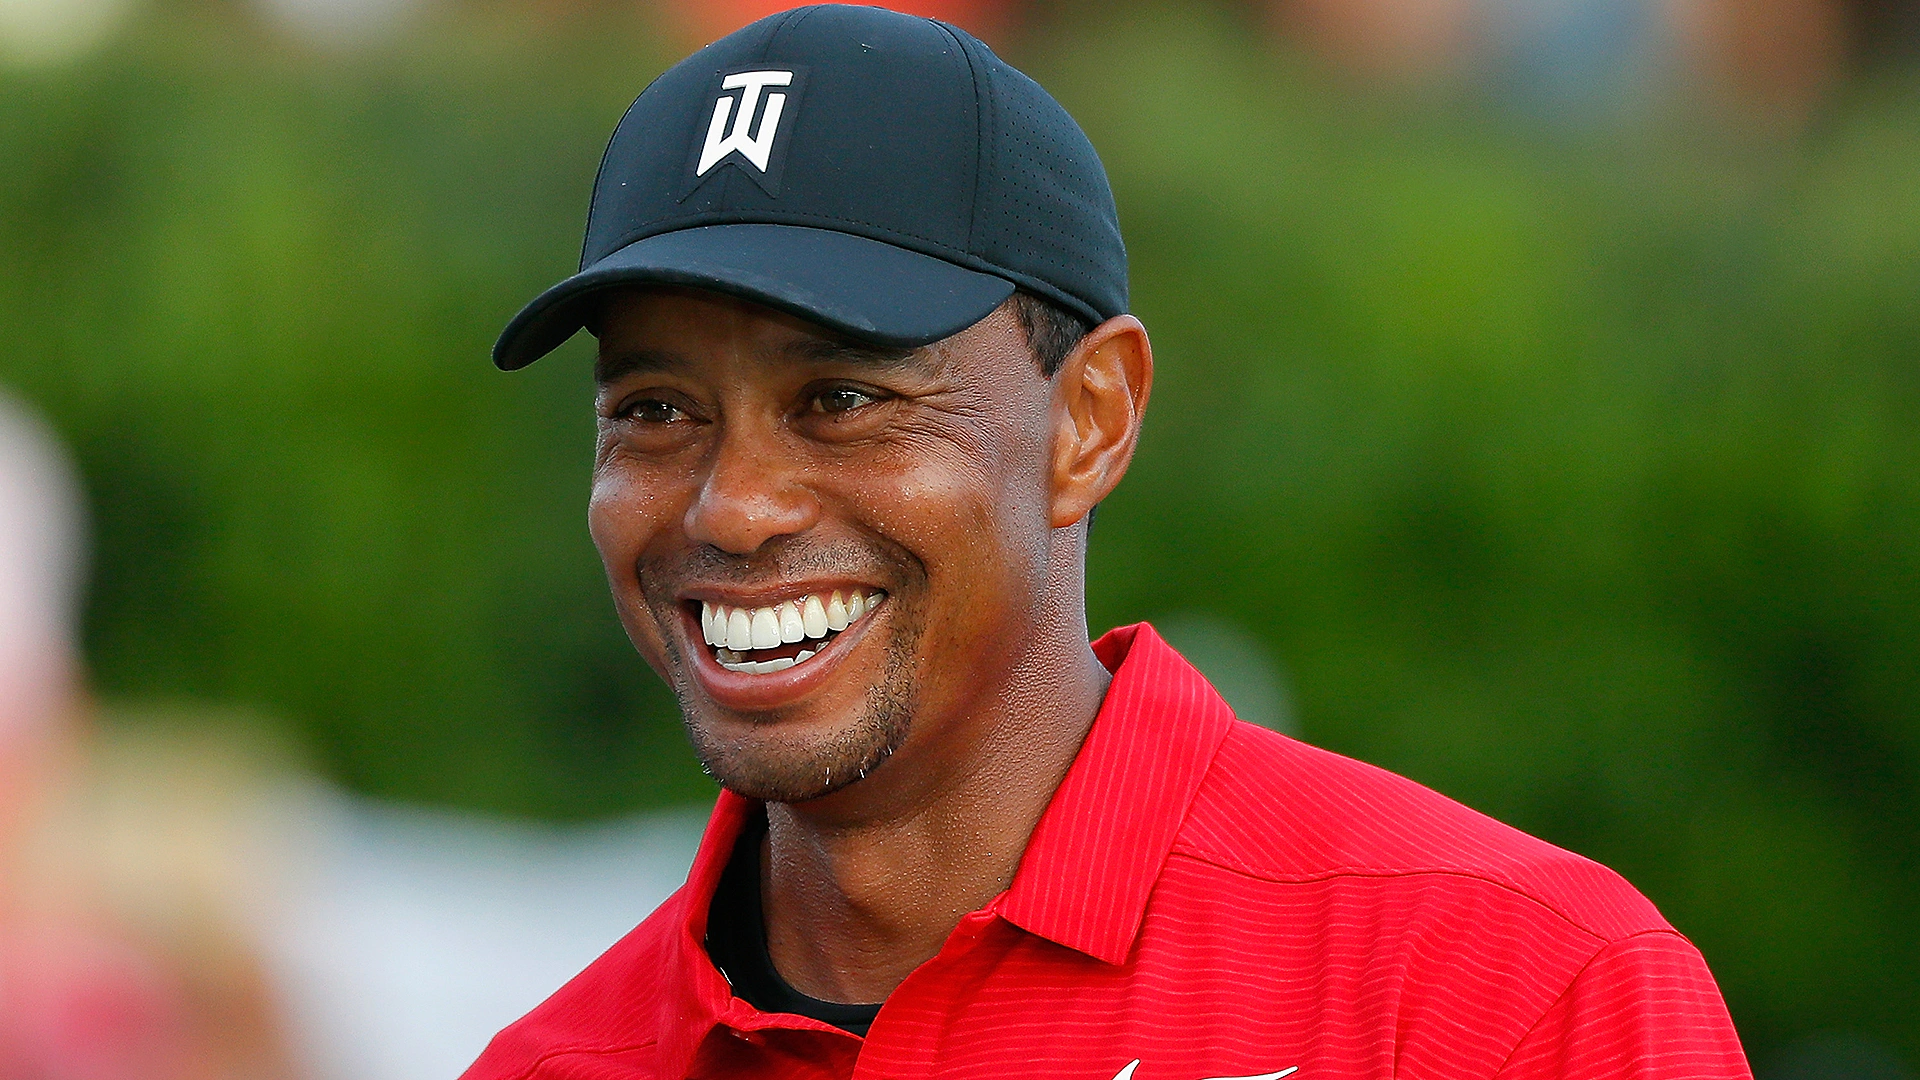 Woods could reach as high as No. 6 with Hero win